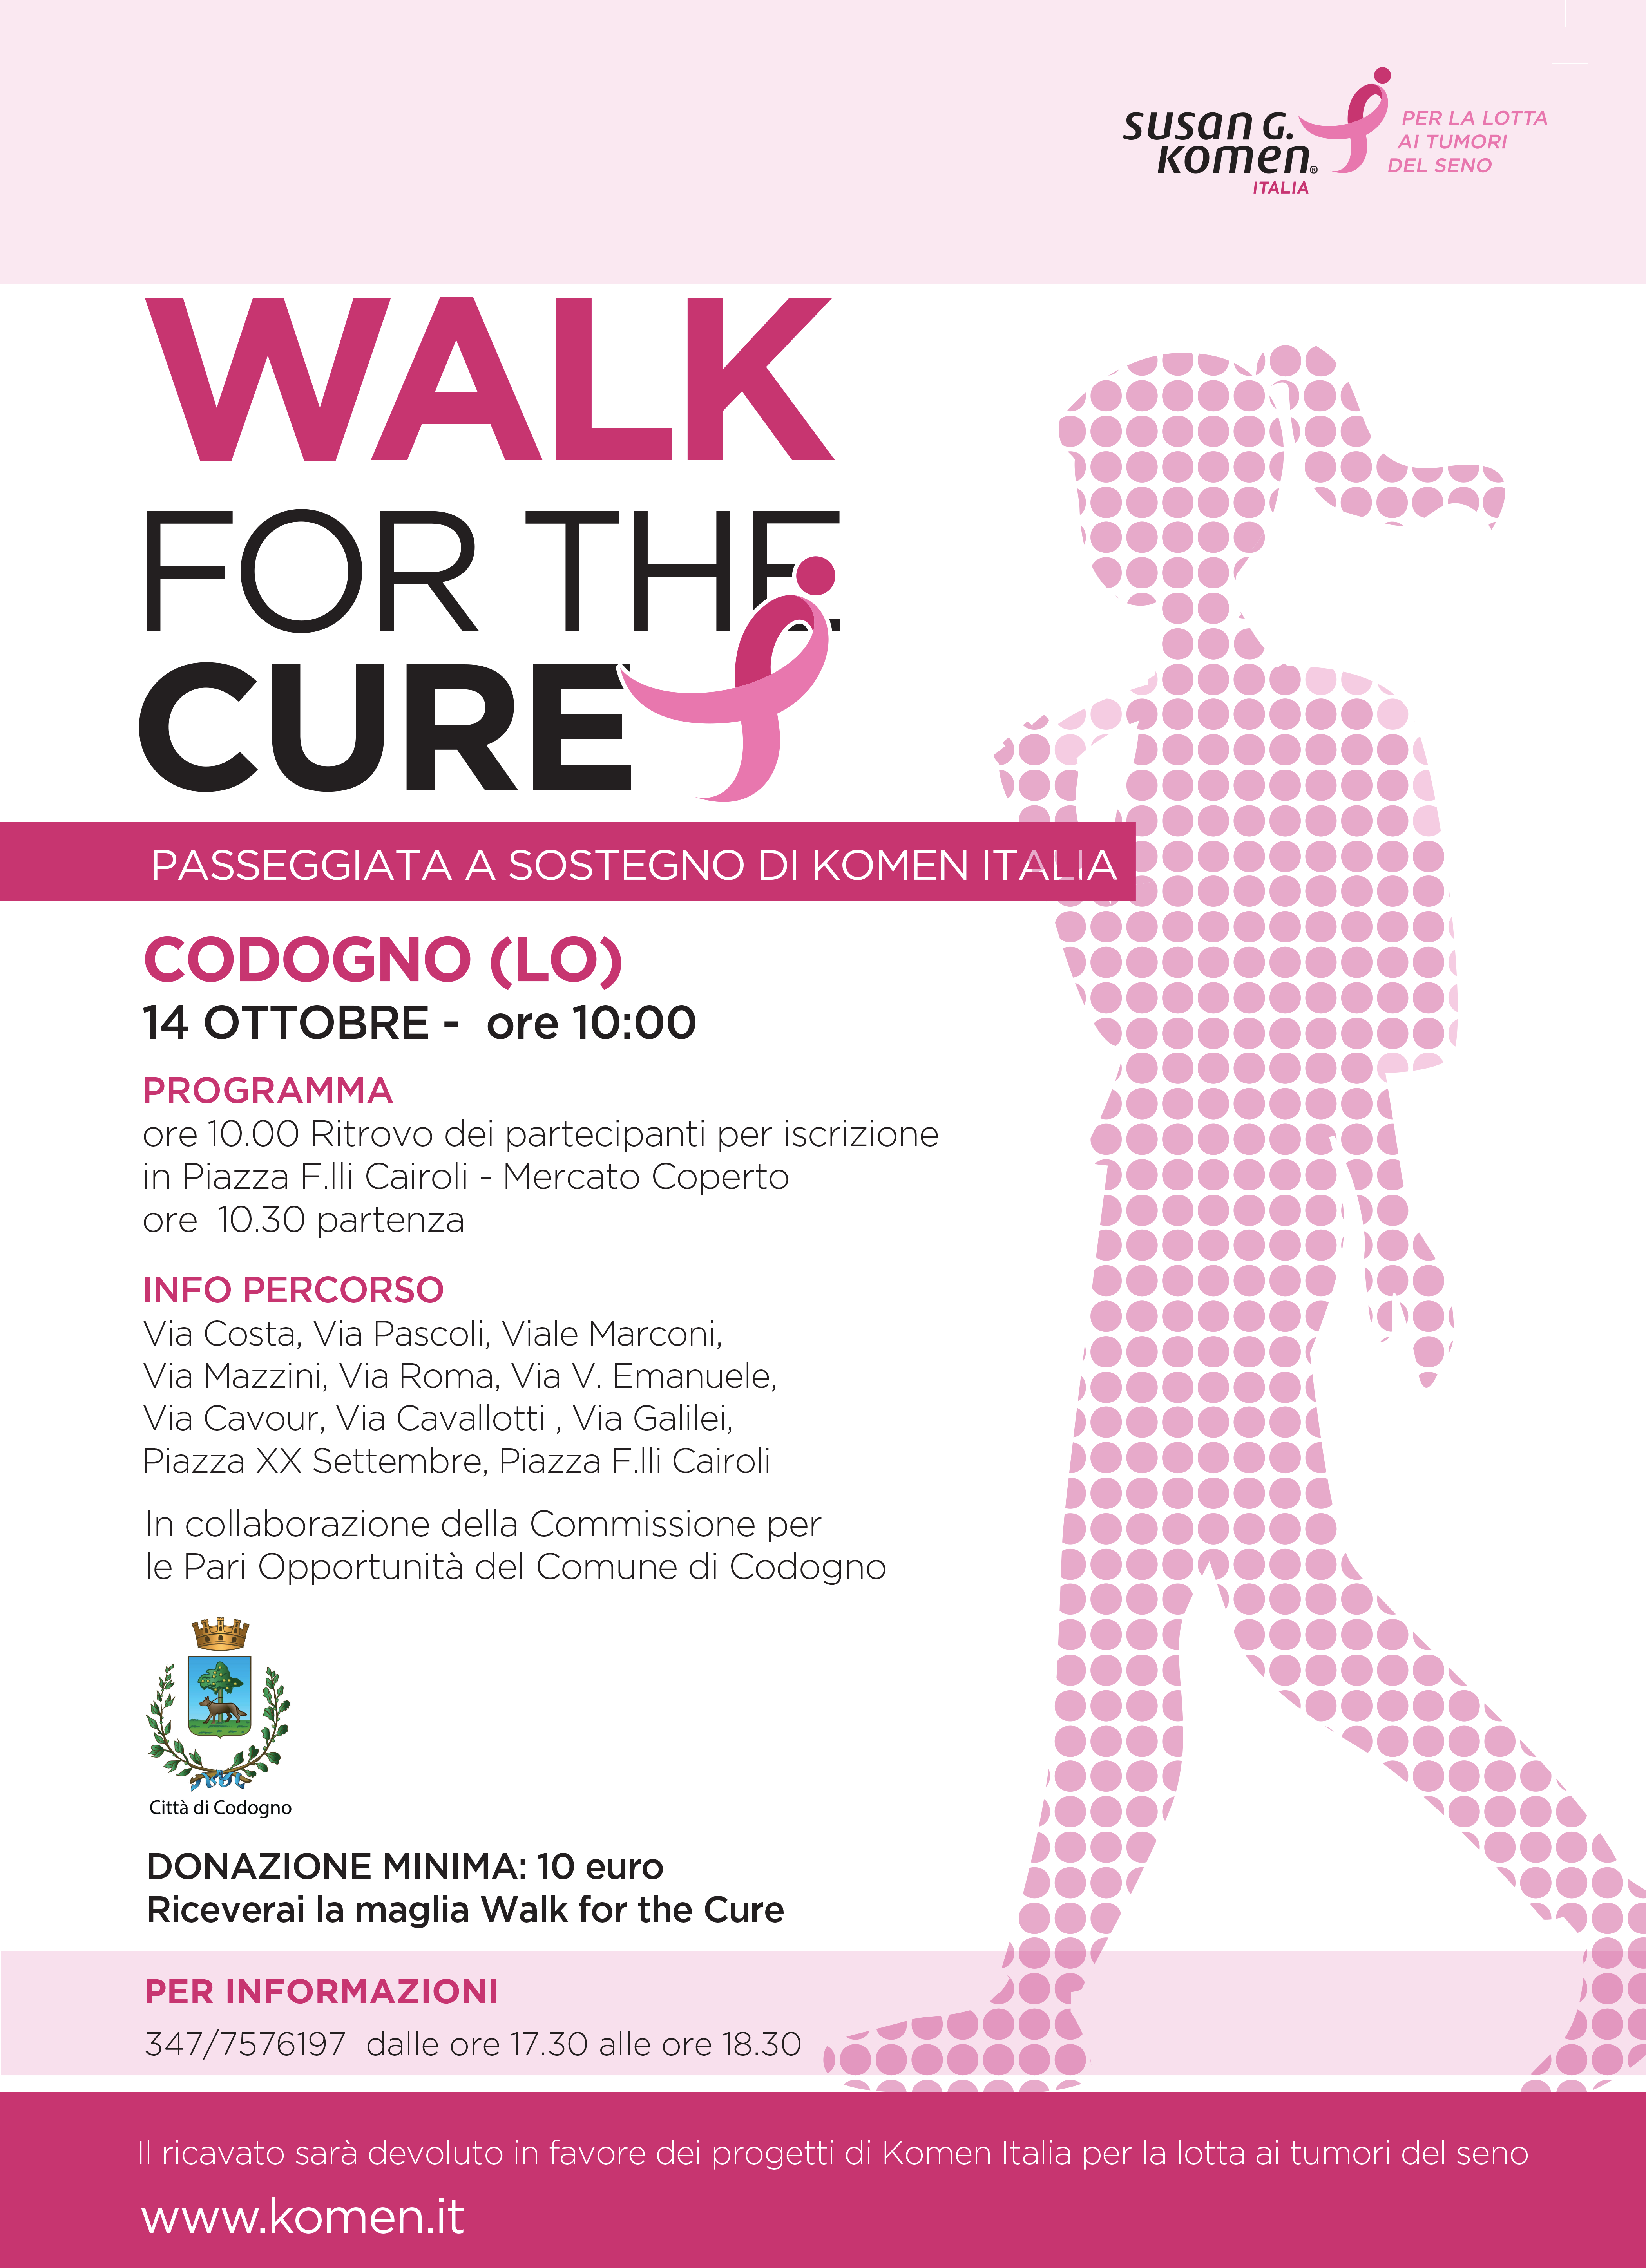 WALK FOR THE CURE